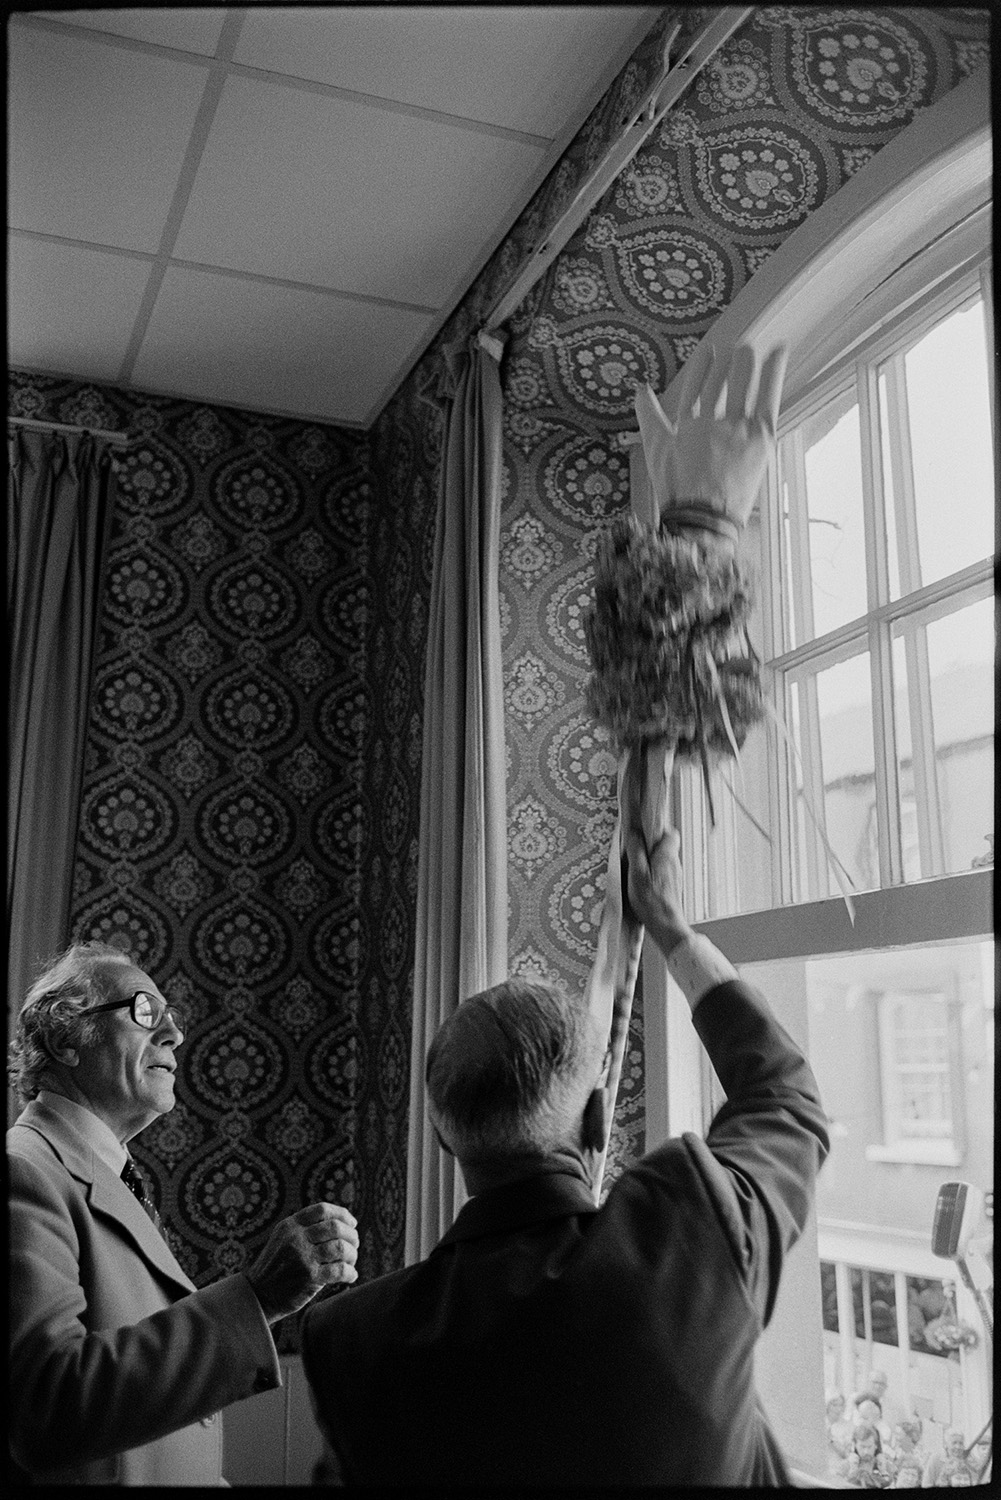 Procession with Fair Queen and band, speech from window, raising the glove, spectators. 
[Joe Fullbrook stood next to another man lifting the Chulmleigh Fair glove by a window inside the town hall, at Chulmleigh Fair. The walls of the room are covered with patterned wallpaper.]